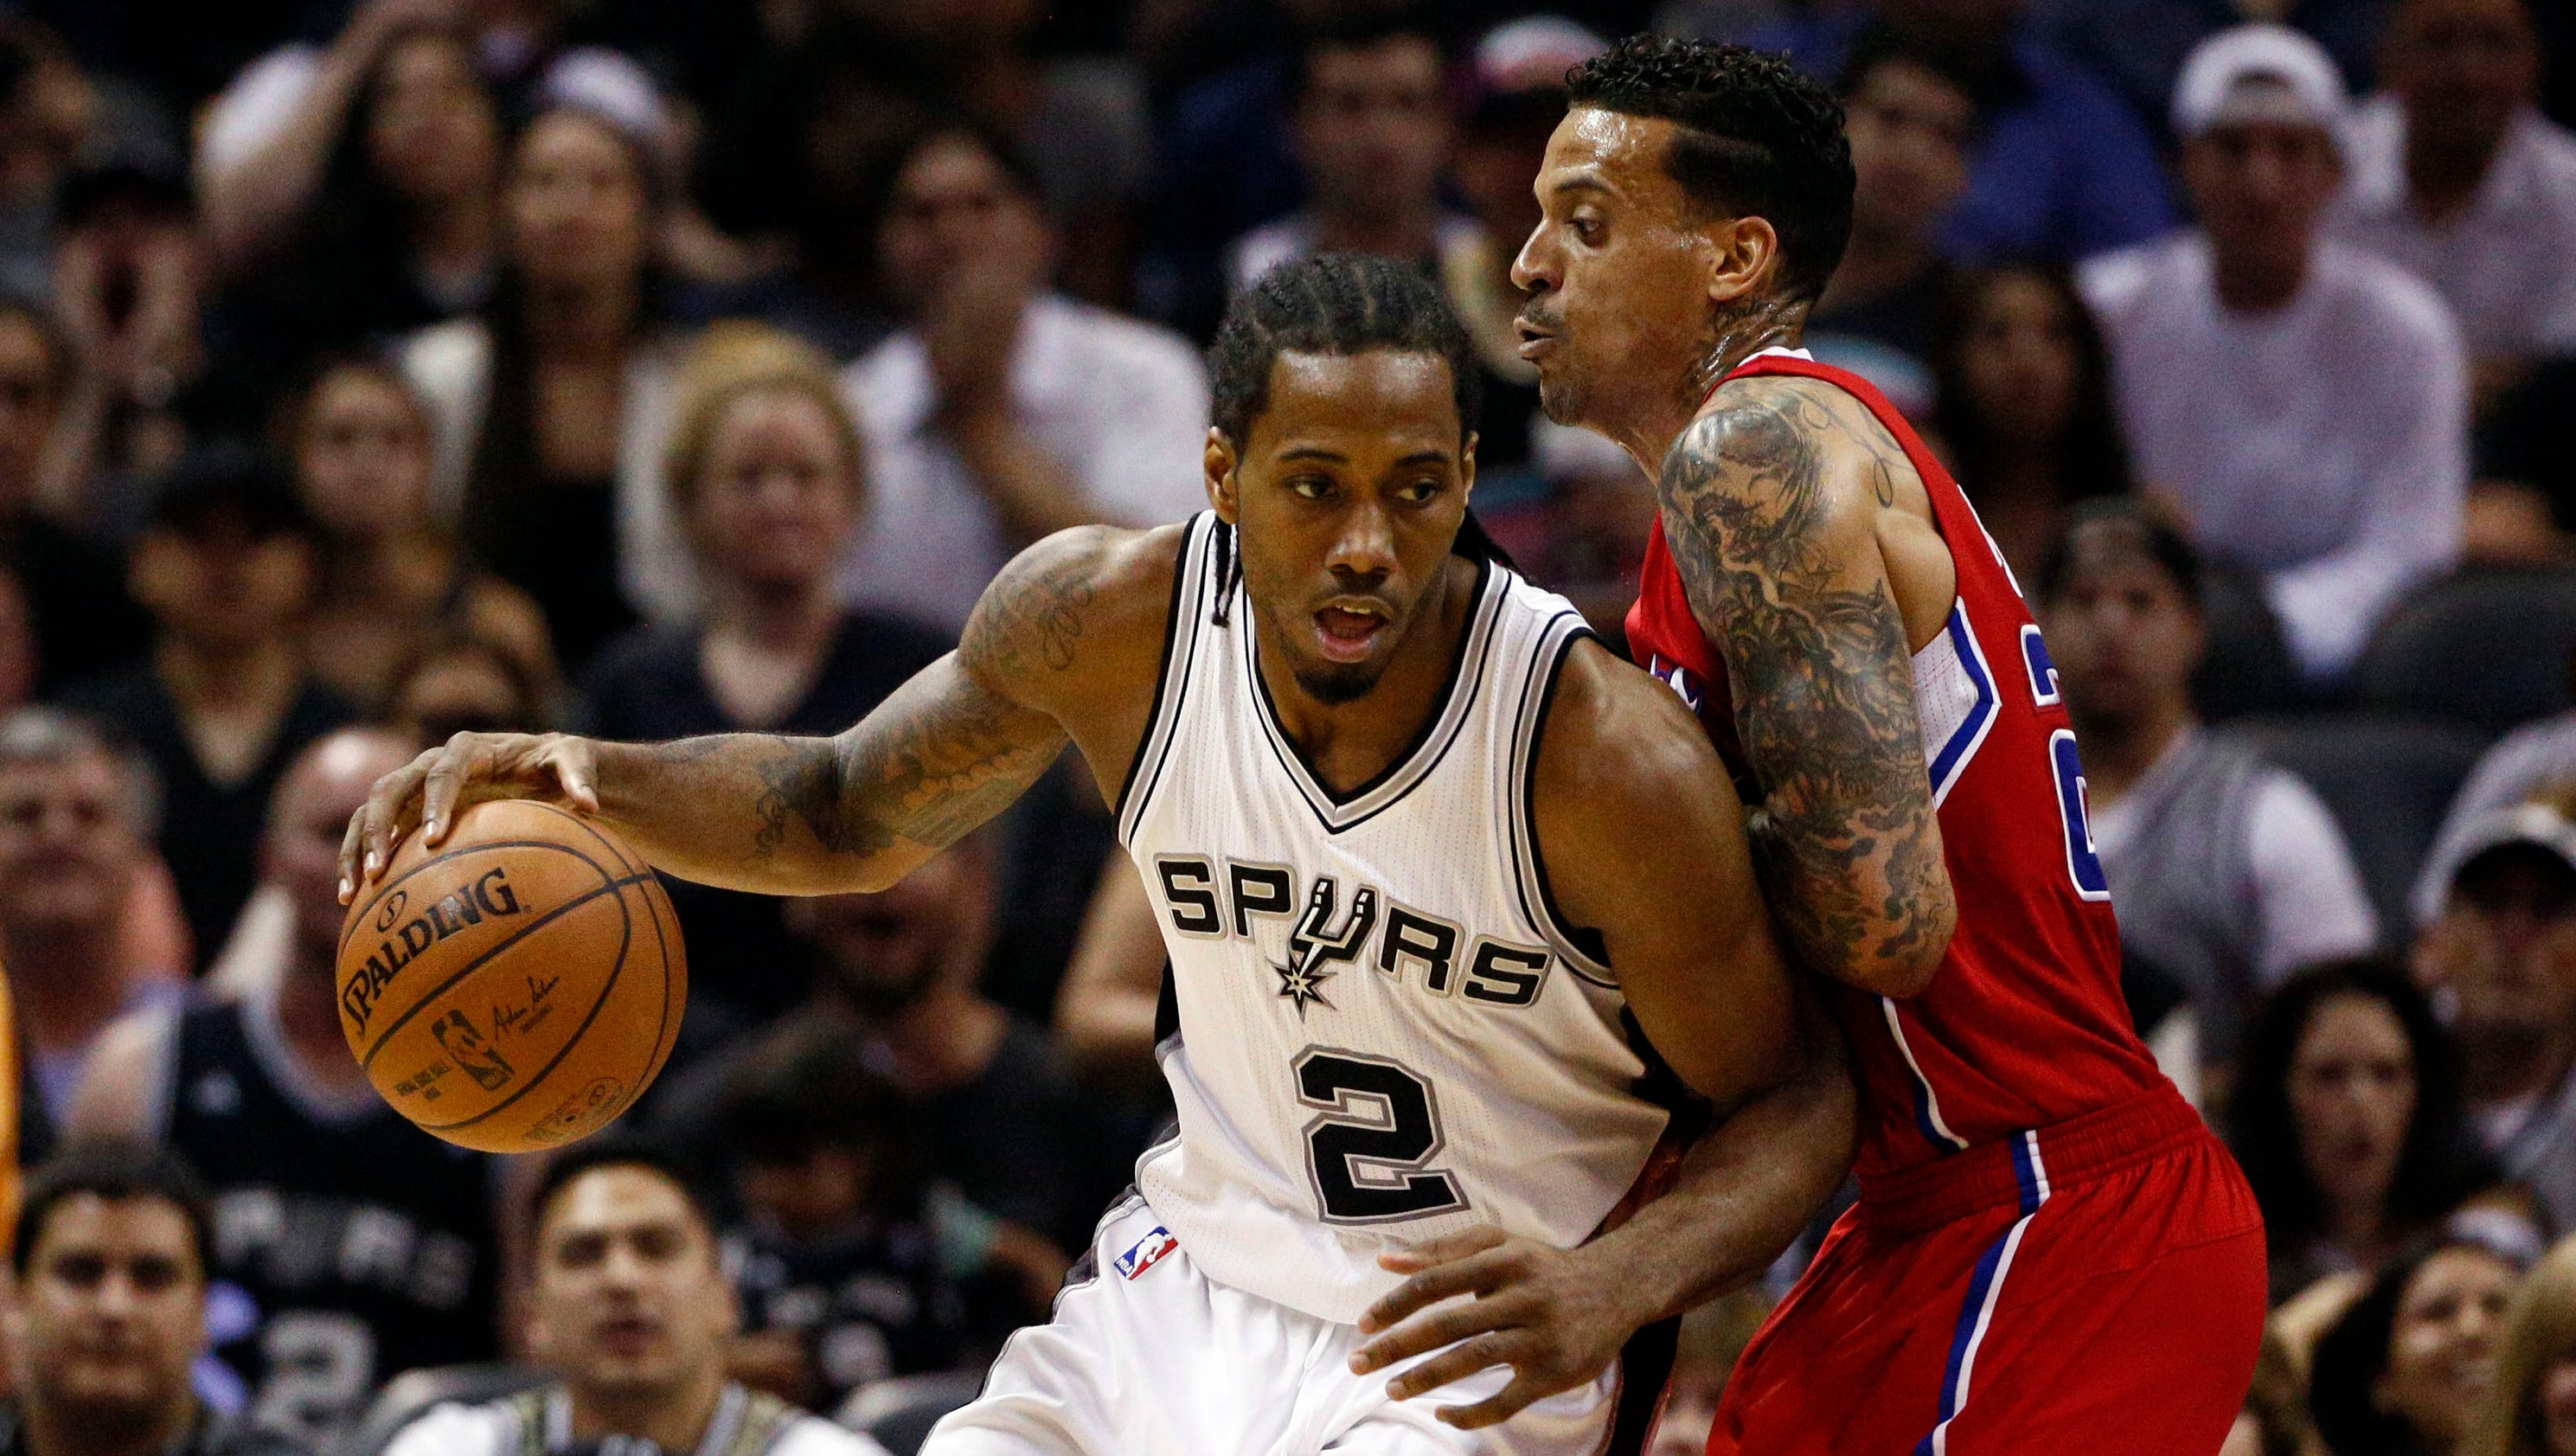 Kawhi Leonard has career-defining performance in Spurs' Game 3 rout of Clippers